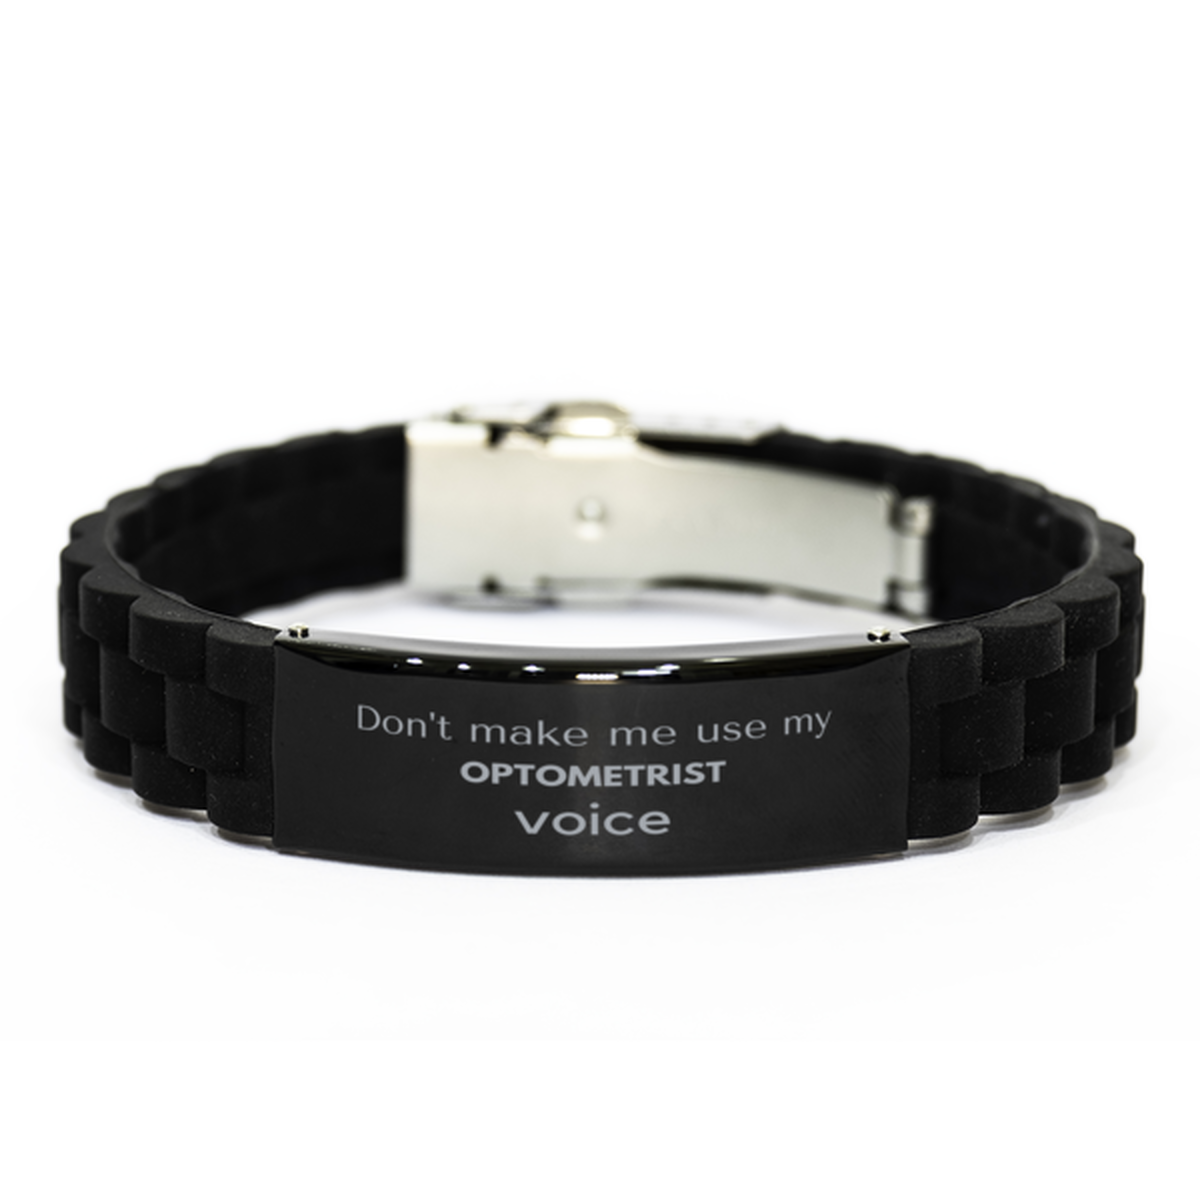 Don't make me use my Optometrist voice, Sarcasm Optometrist Gifts, Christmas Optometrist Black Glidelock Clasp Bracelet Birthday Unique Gifts For Optometrist Coworkers, Men, Women, Colleague, Friends